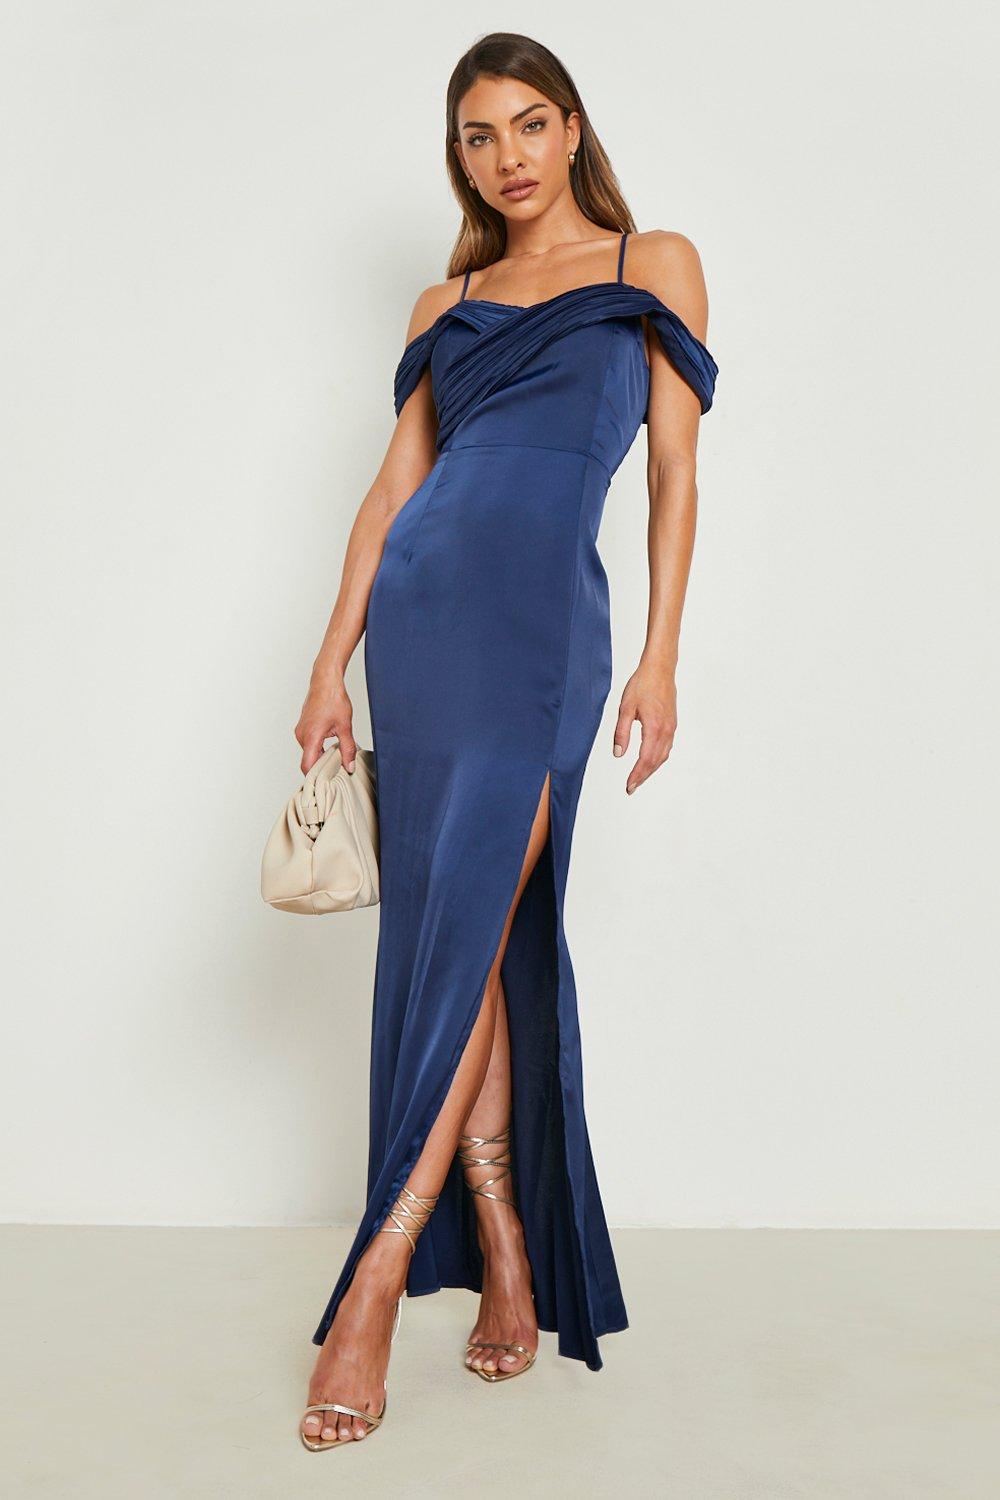 Satin Off The Shoulder Strappy Maxi Dress